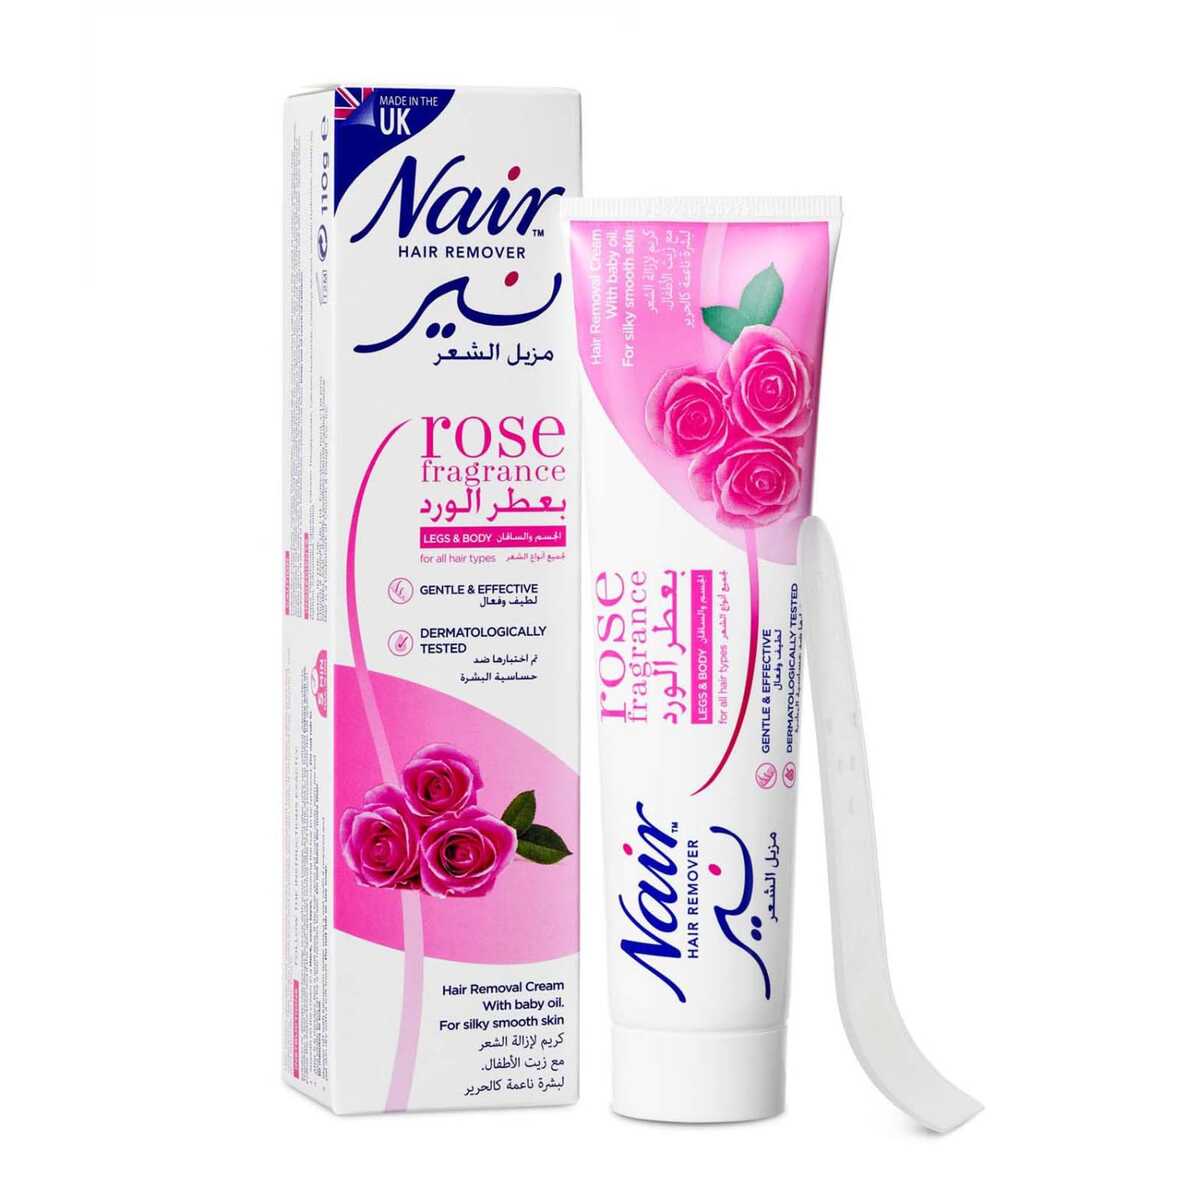 Nair Hair Removal Body Cream with Softening Baby Oil, Leg and Body